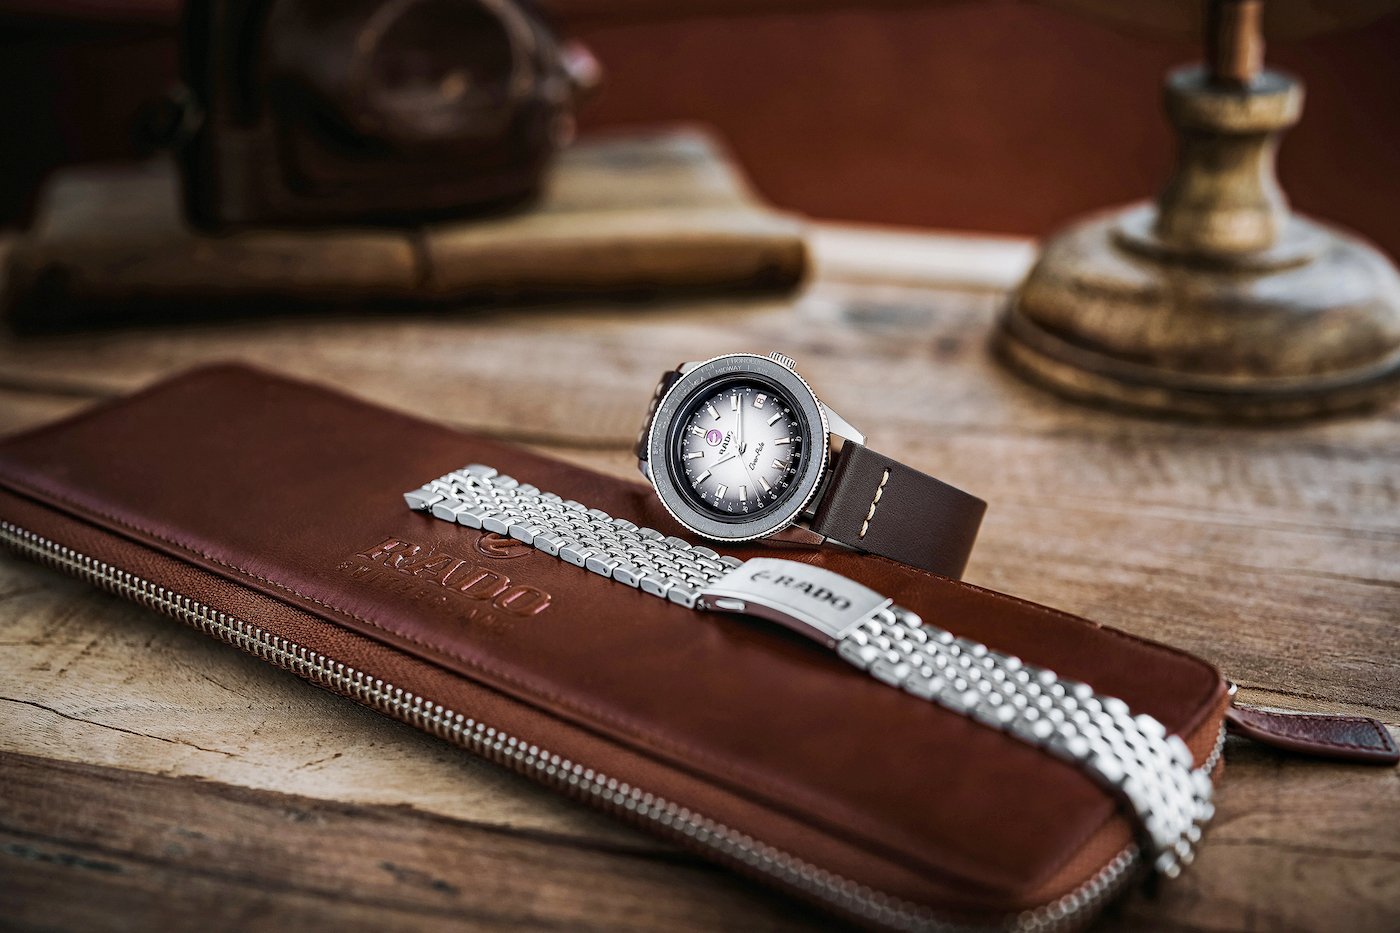 Presenting Rado's Captain Cook Over-Pole Limited Edition 